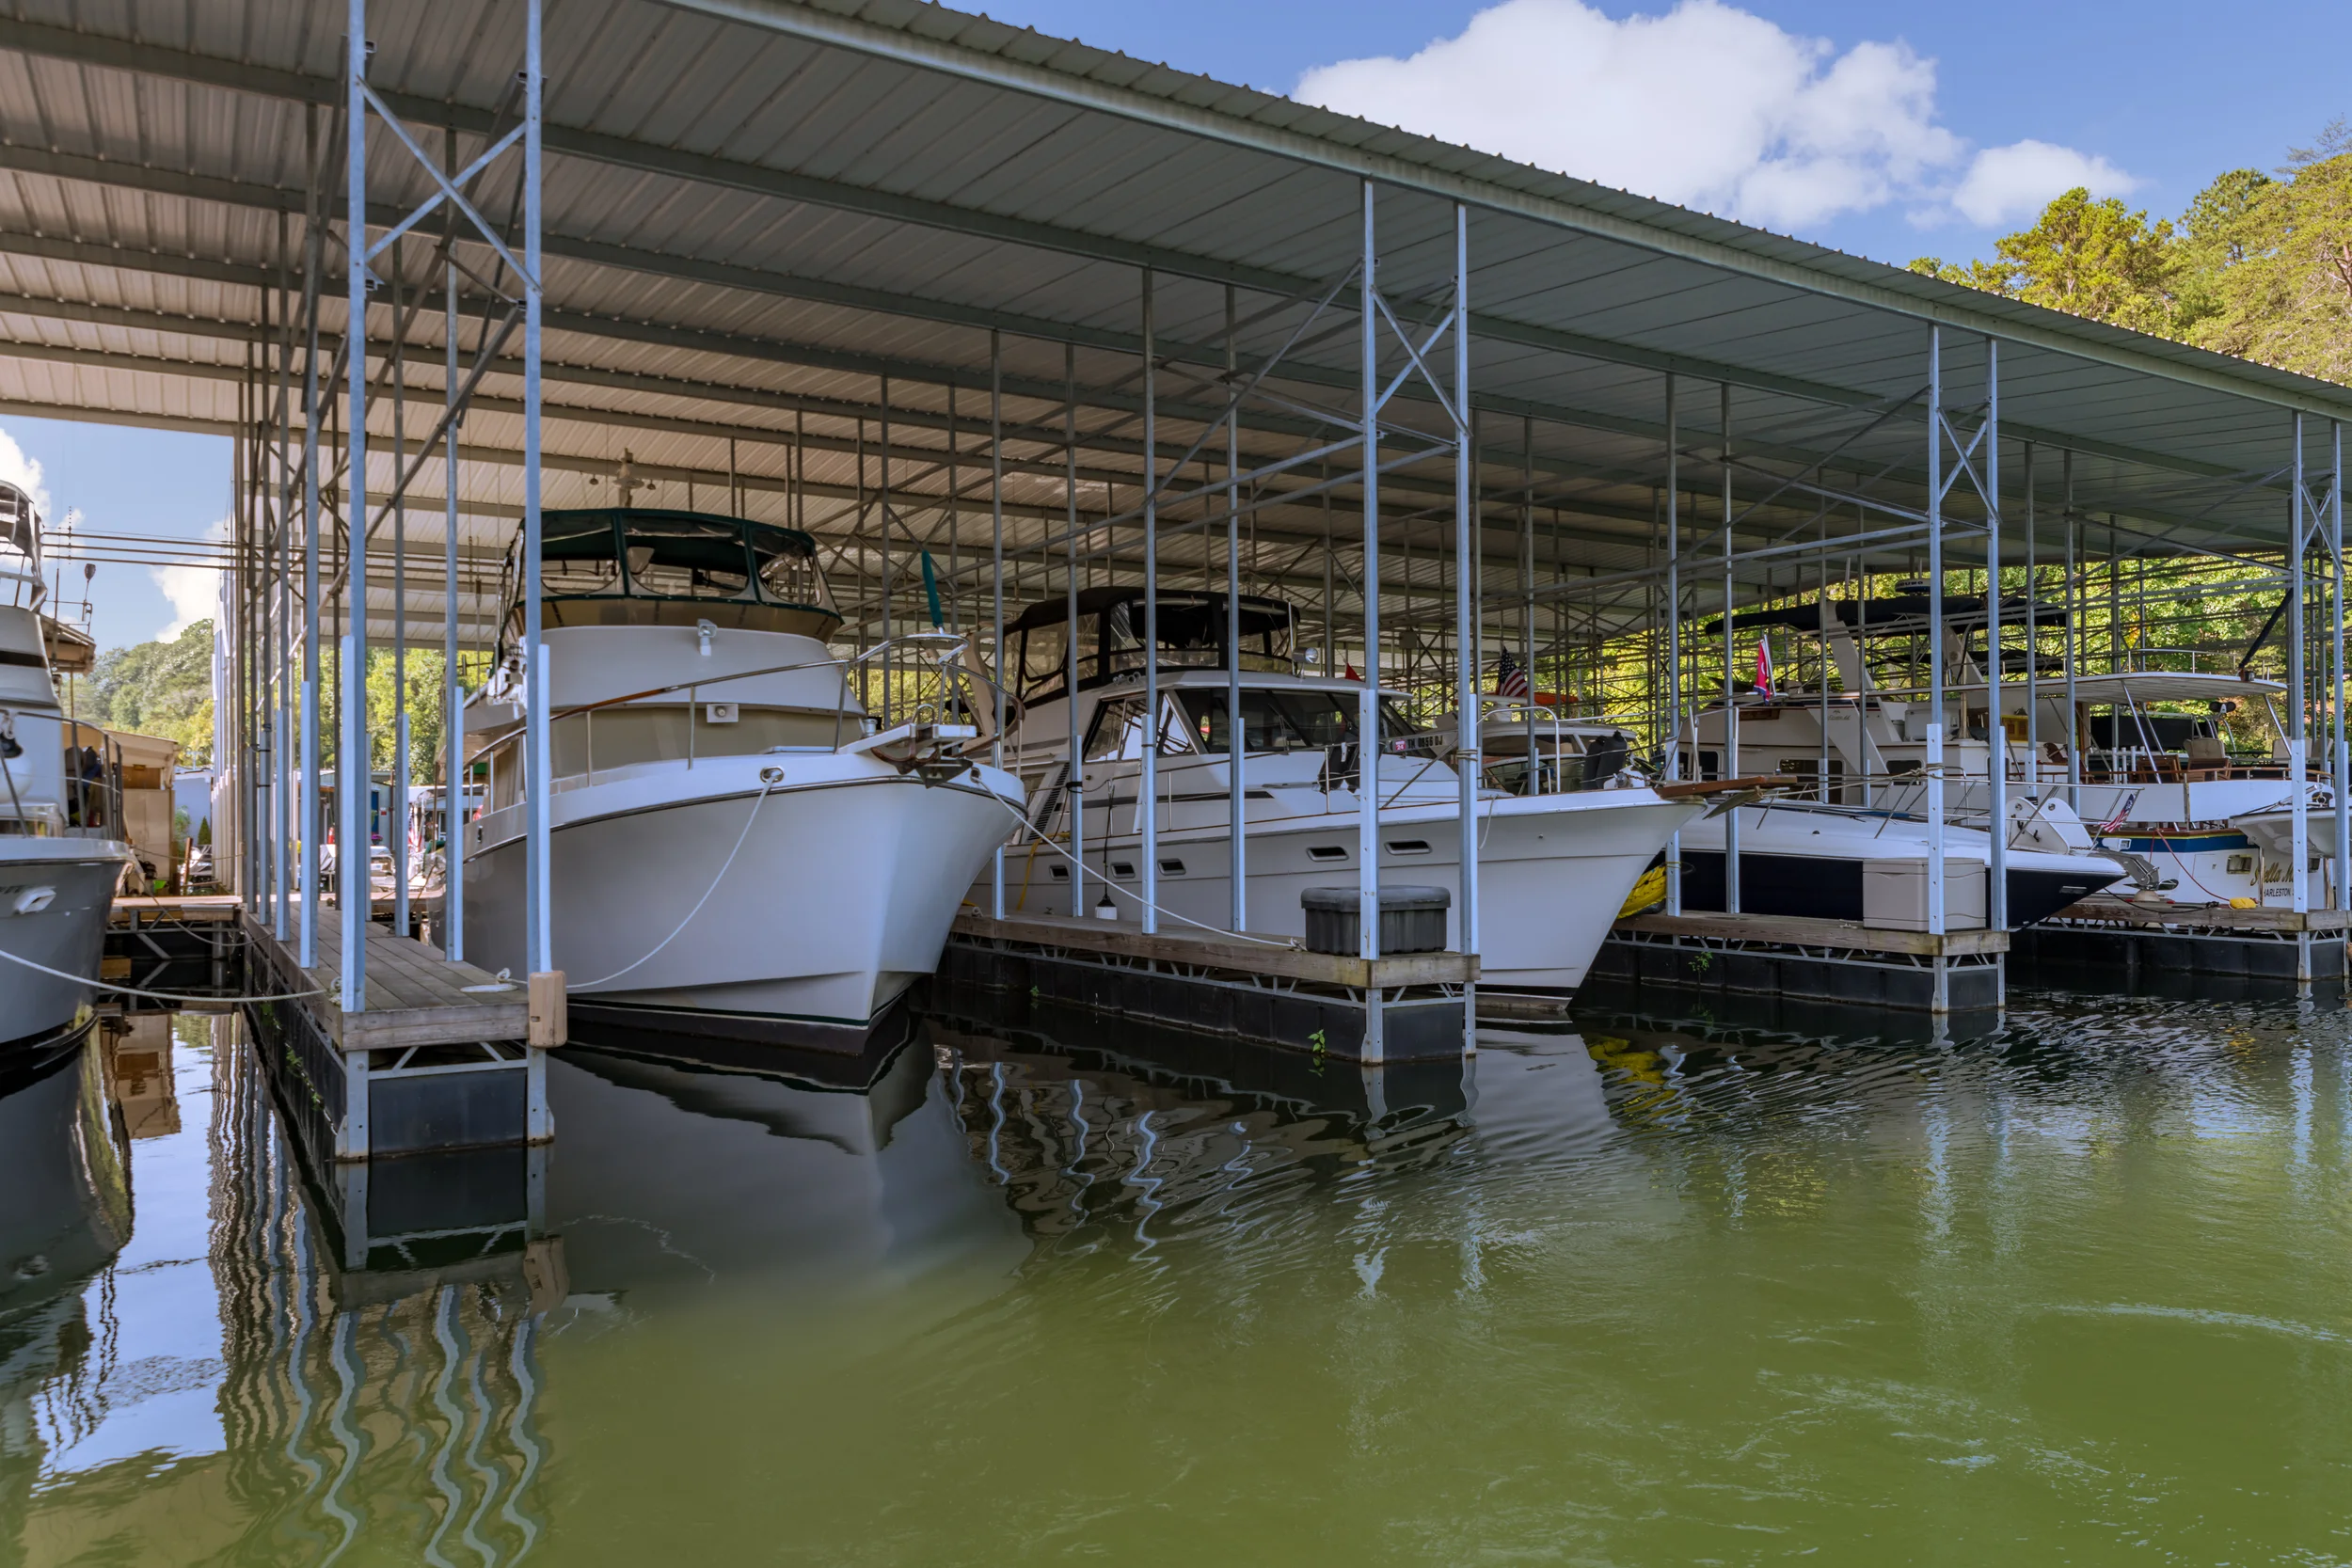 Boats docked at marina by Riverside Bed and Breakfast in Soddy Daisy, Tennessee